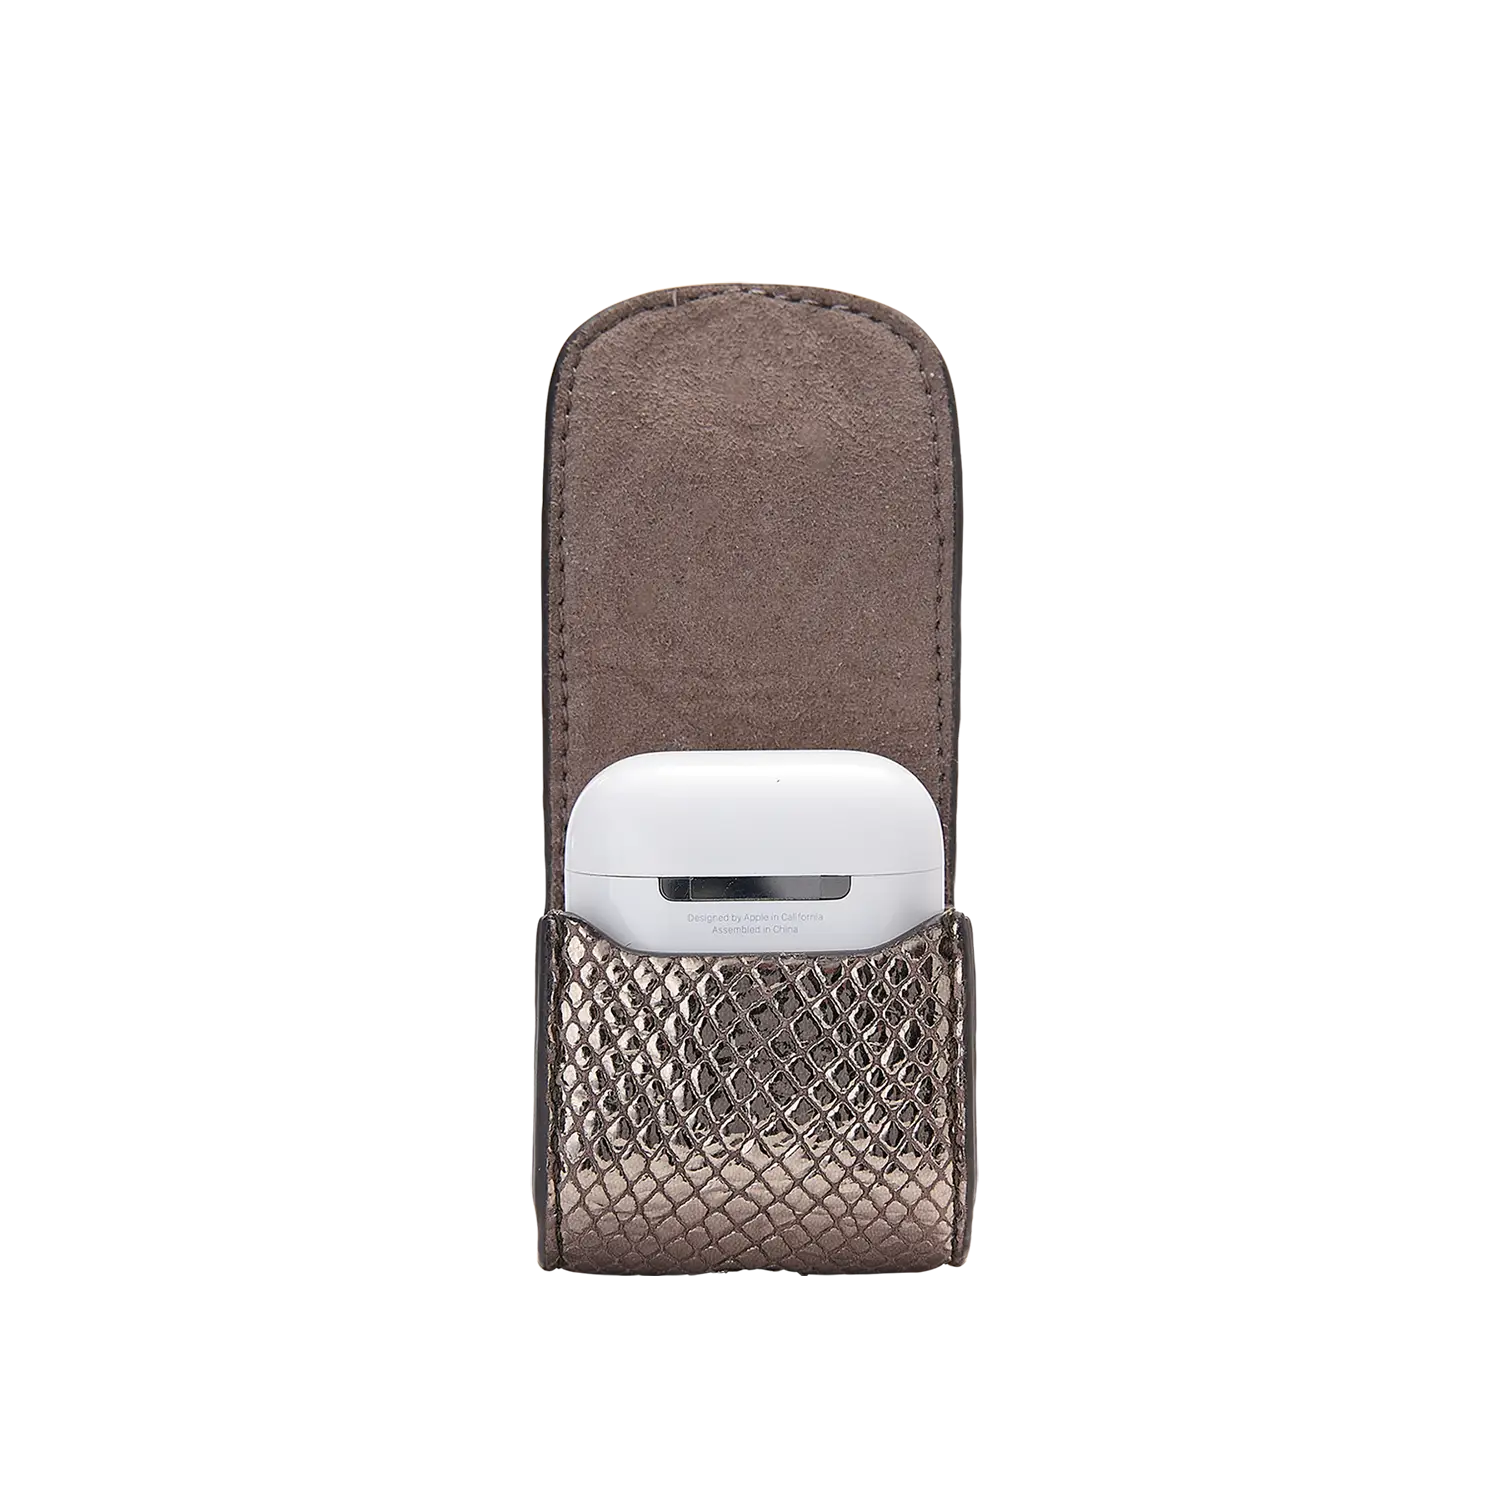 Airpods Bag - Keep it Funky - bronze